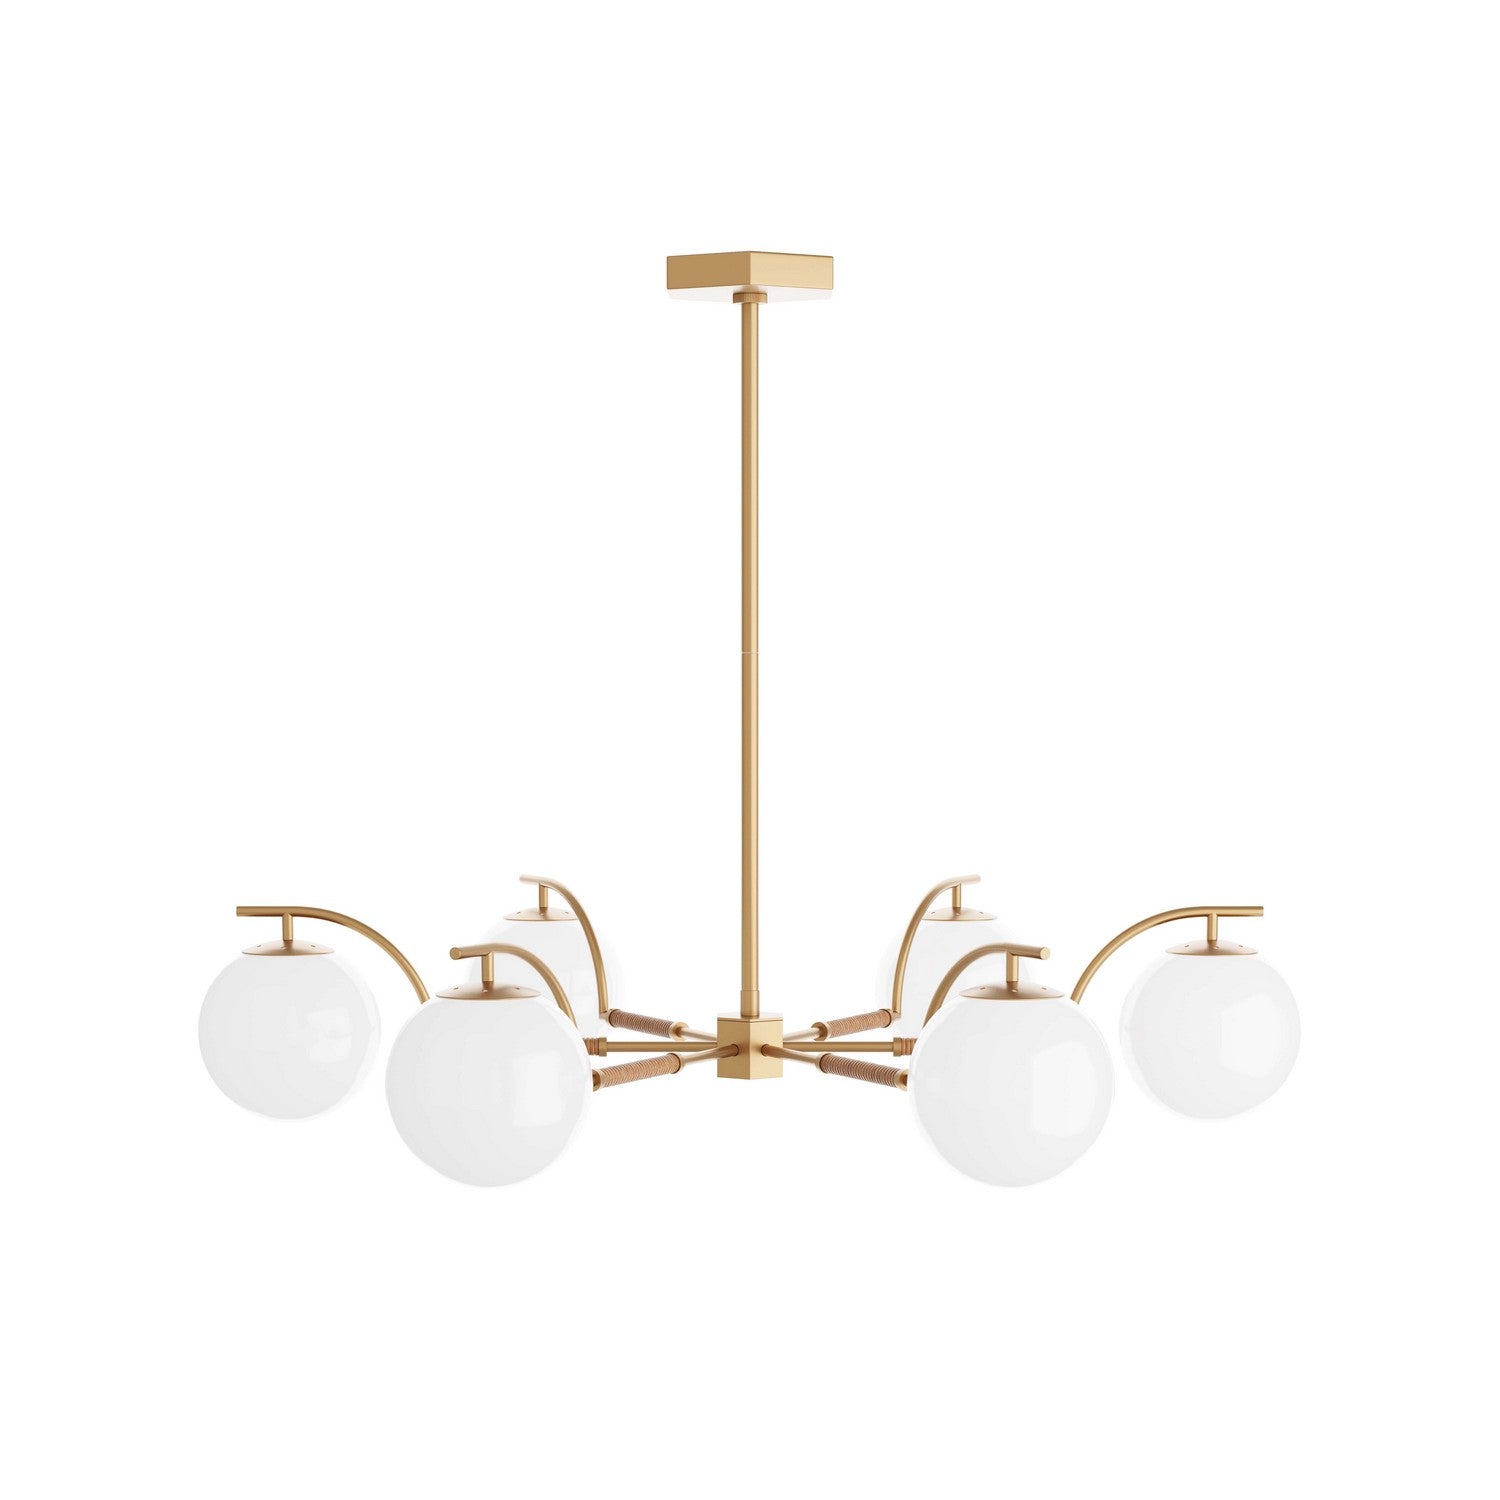 Six Light Chandelier from the Tricia collection in Antique Brass finish